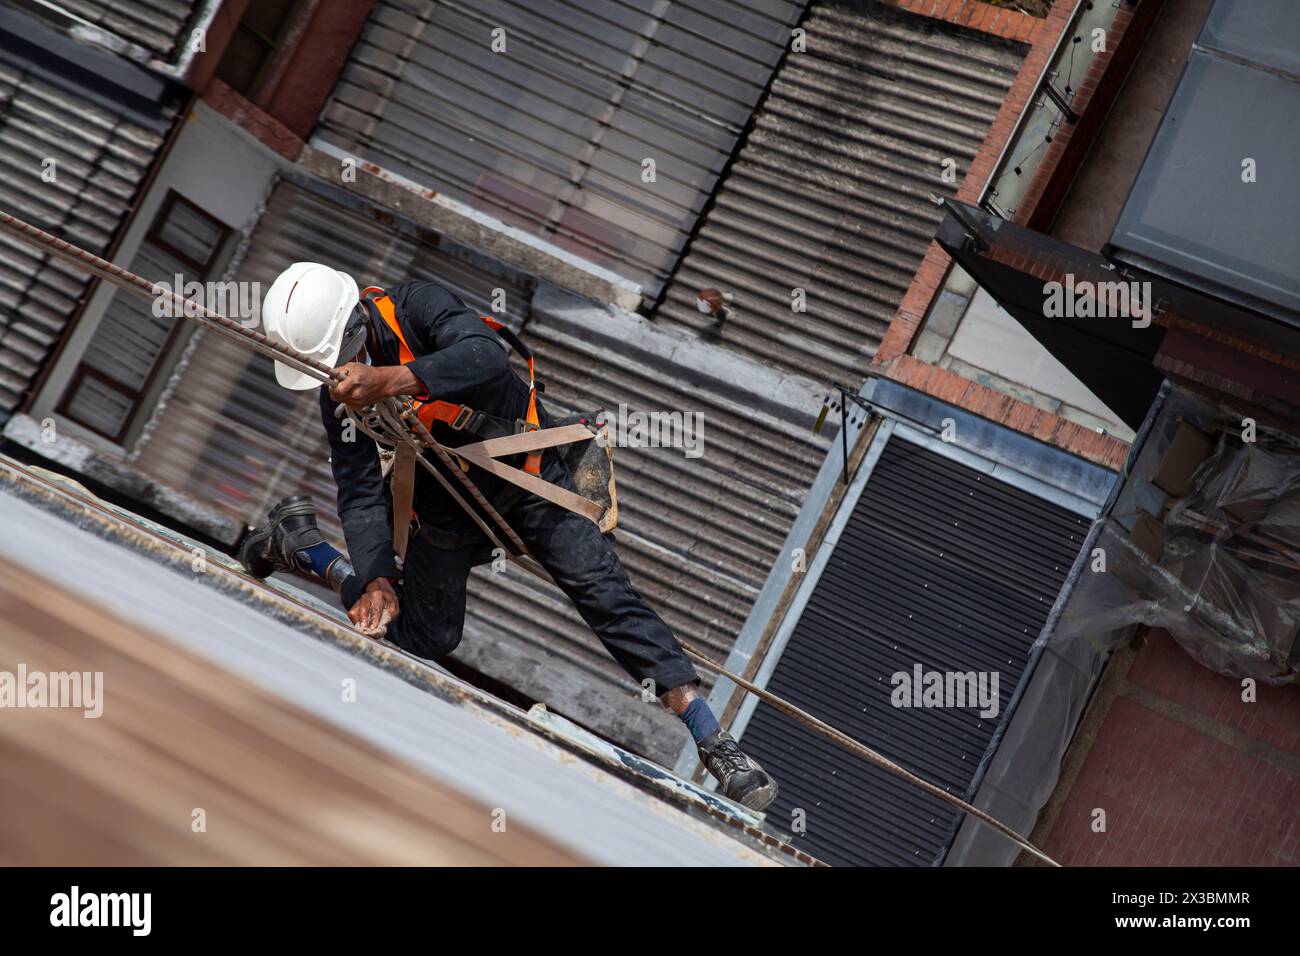 rope secured worker hangs from the building Stock Photo